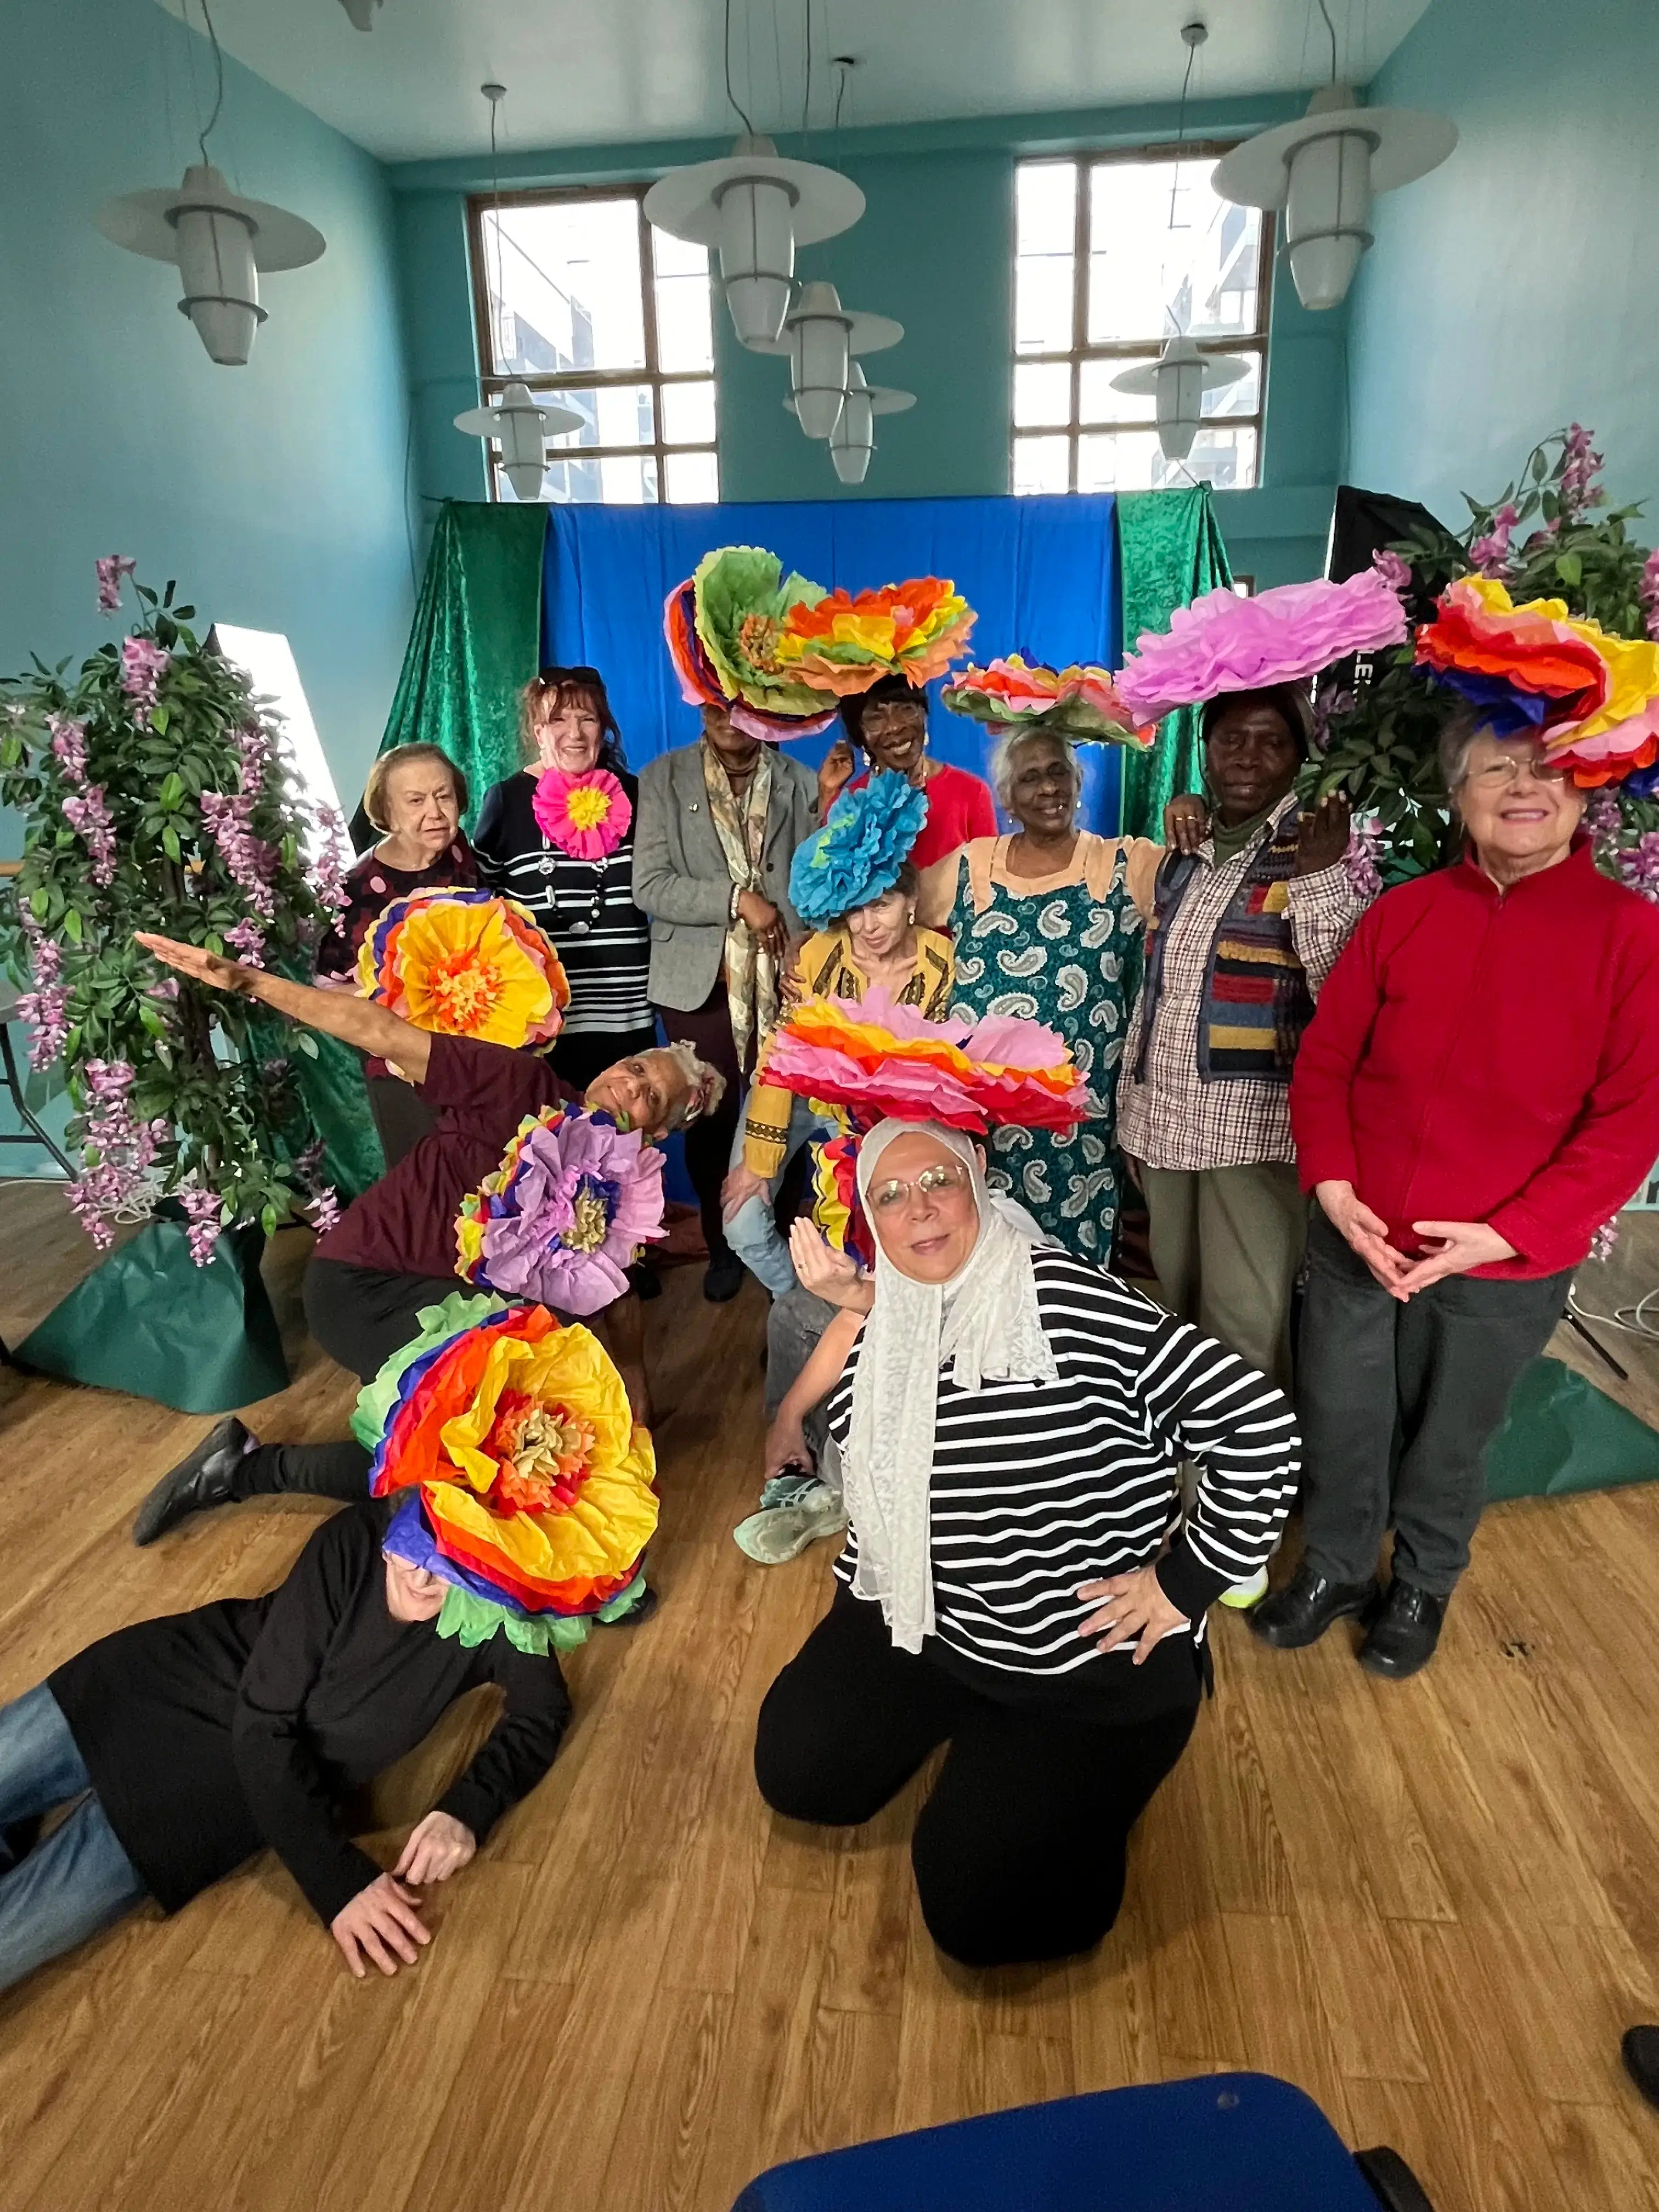 A lively group of people wearing oversized, colorful paper flowers on their heads, posing for a fun and vibrant photo in a room decorated with greenery and festive backdrops.